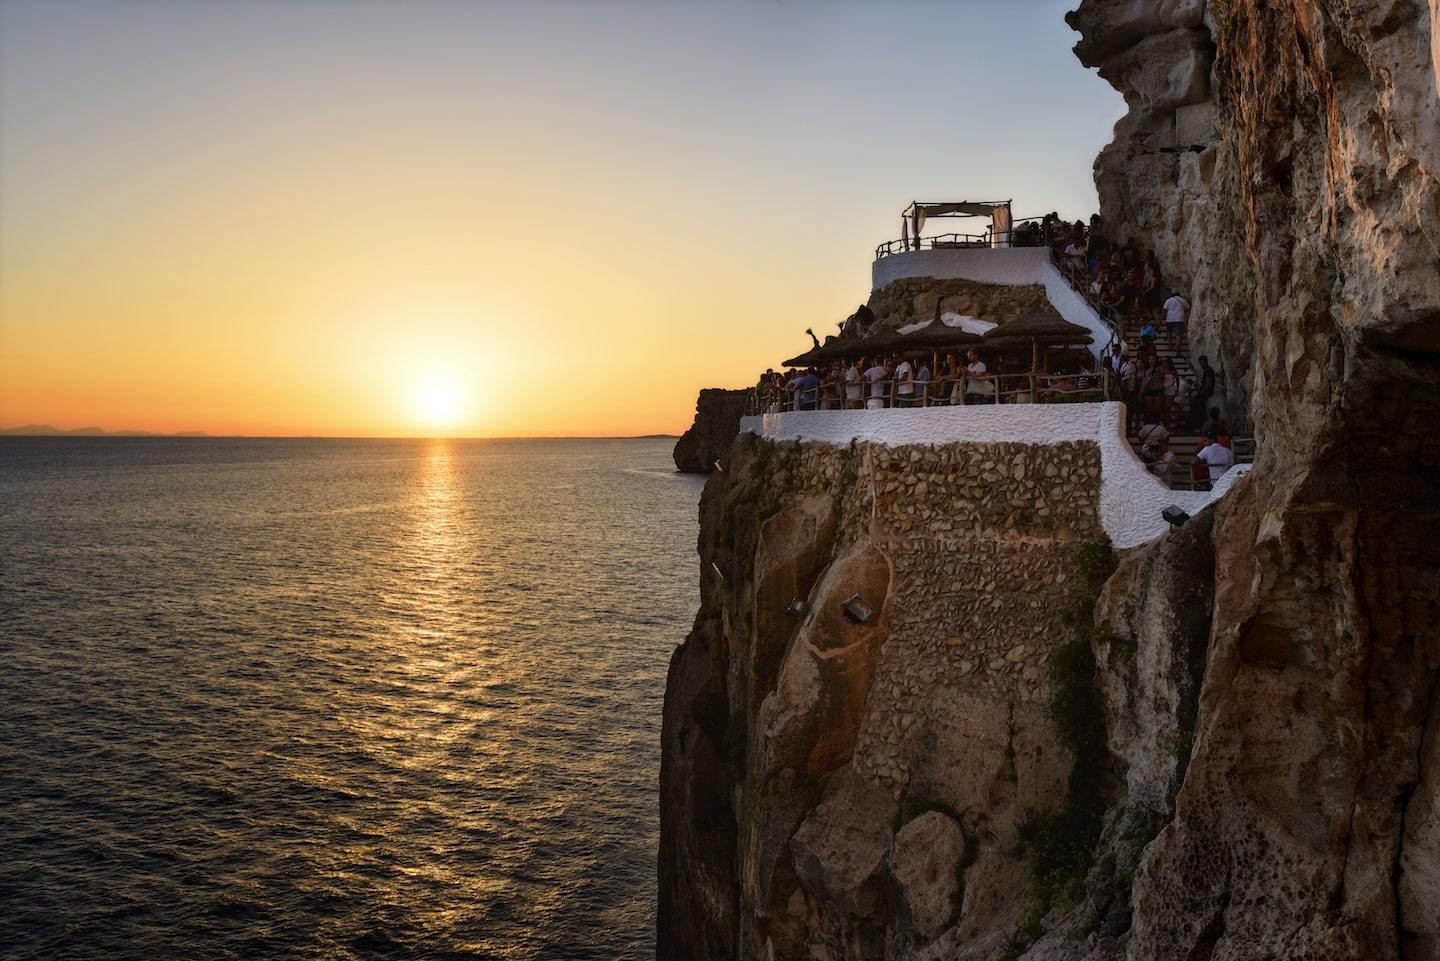 bar on the side of a cliff overlooking the water during sunset